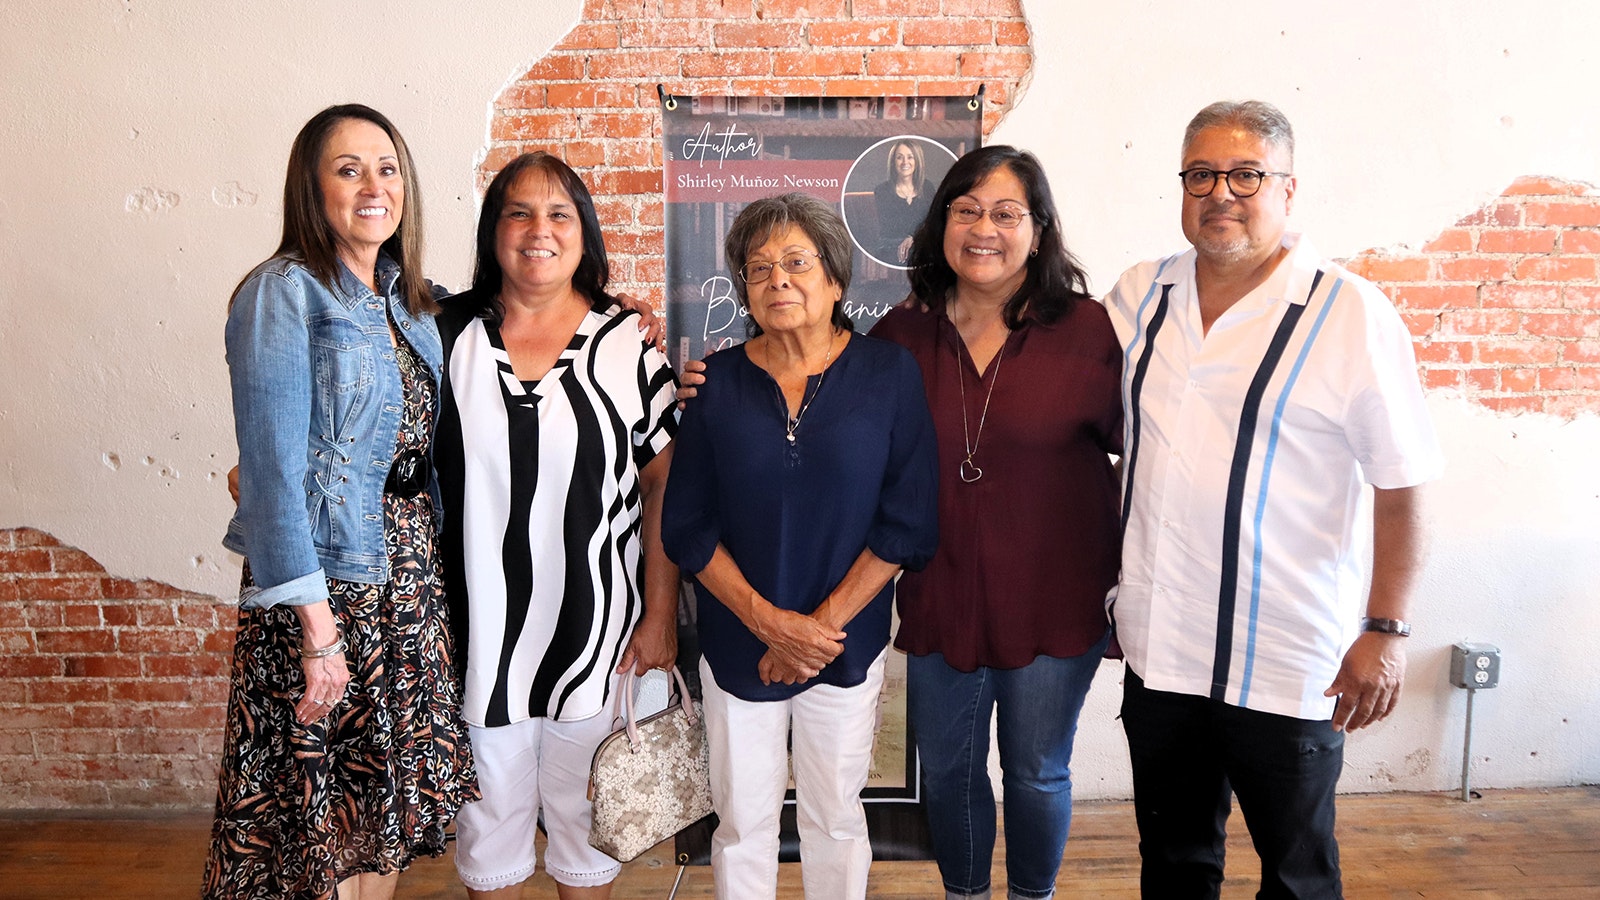 Shirely Munoz Newson, far left, with some members of her biological family, whom she didn't meet until after she learned before her 43rd birthday that she was switched at birth. They are, from left, cousin Brenda Munoz, aunt Mary Mercado, cousin Kim Accurso and cousin Nick Munoz.